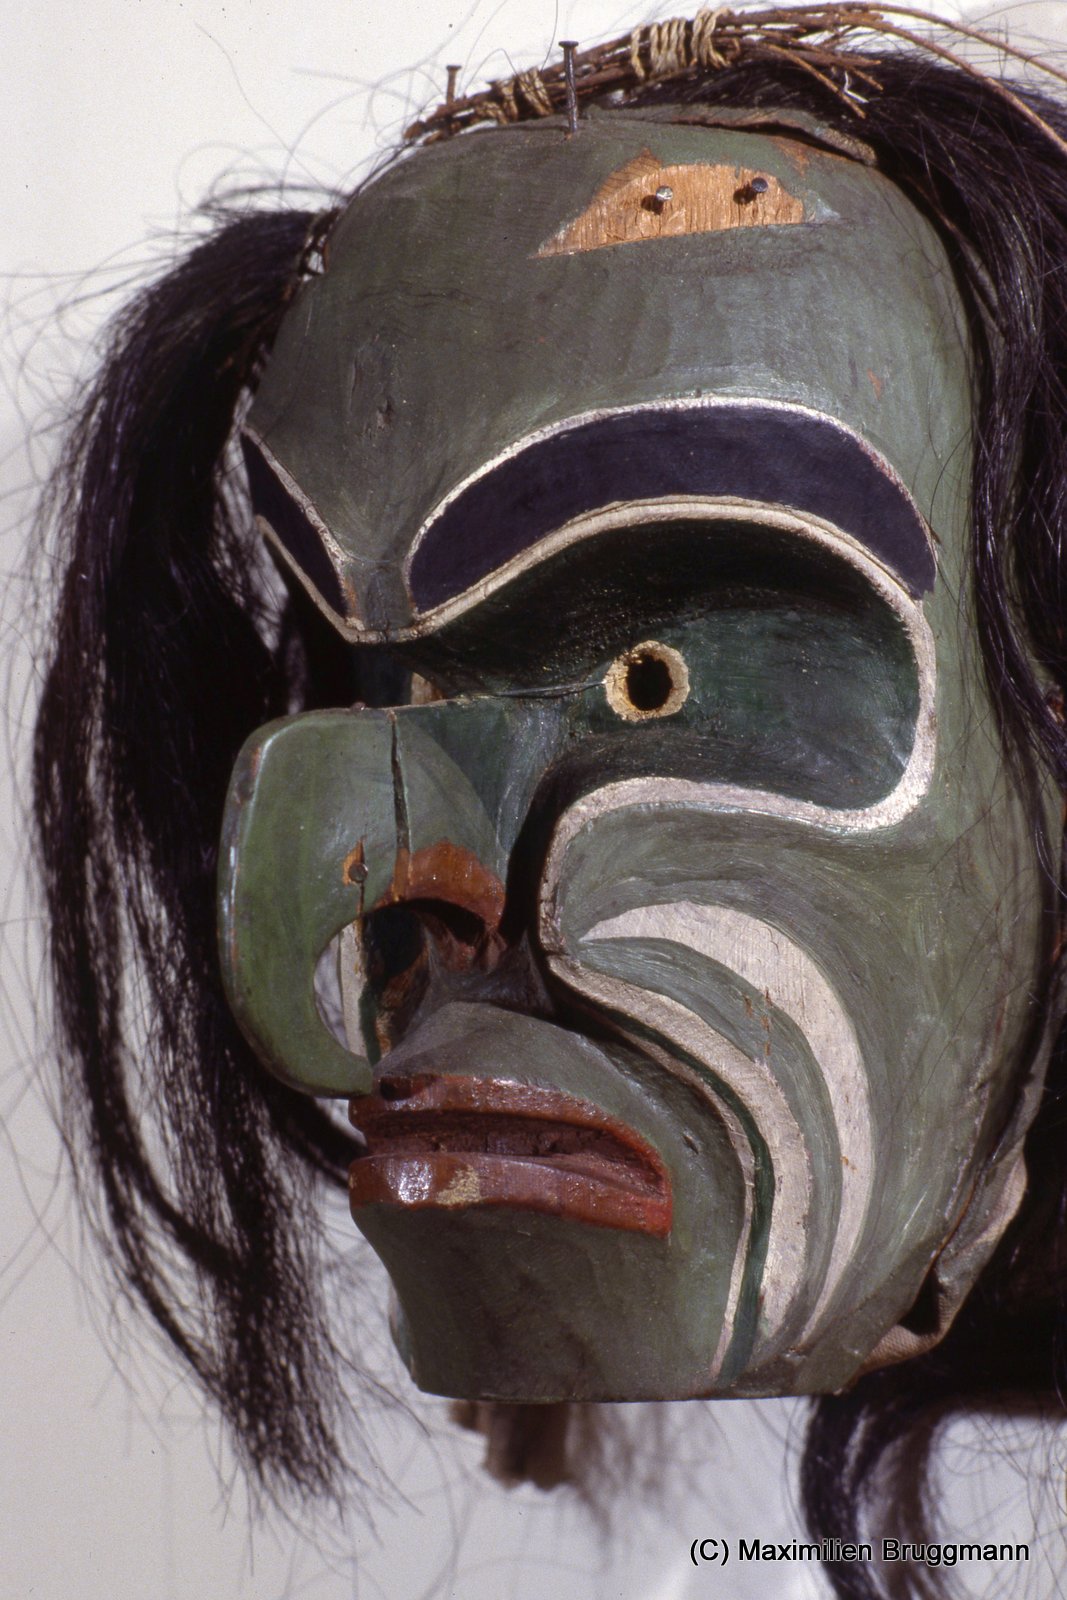 p135. The Lekwiltok Kwakiutl mask represents Bookwus, the wild forest monster.The animal-like earsare missing from the forehead. Confiscated 1n 1922, along with other potlatch goods, the mask was returned 1n 1979 to the new Kwakiutl museum in Quathiaski Cove, located on Quadra Island, British Columbia.